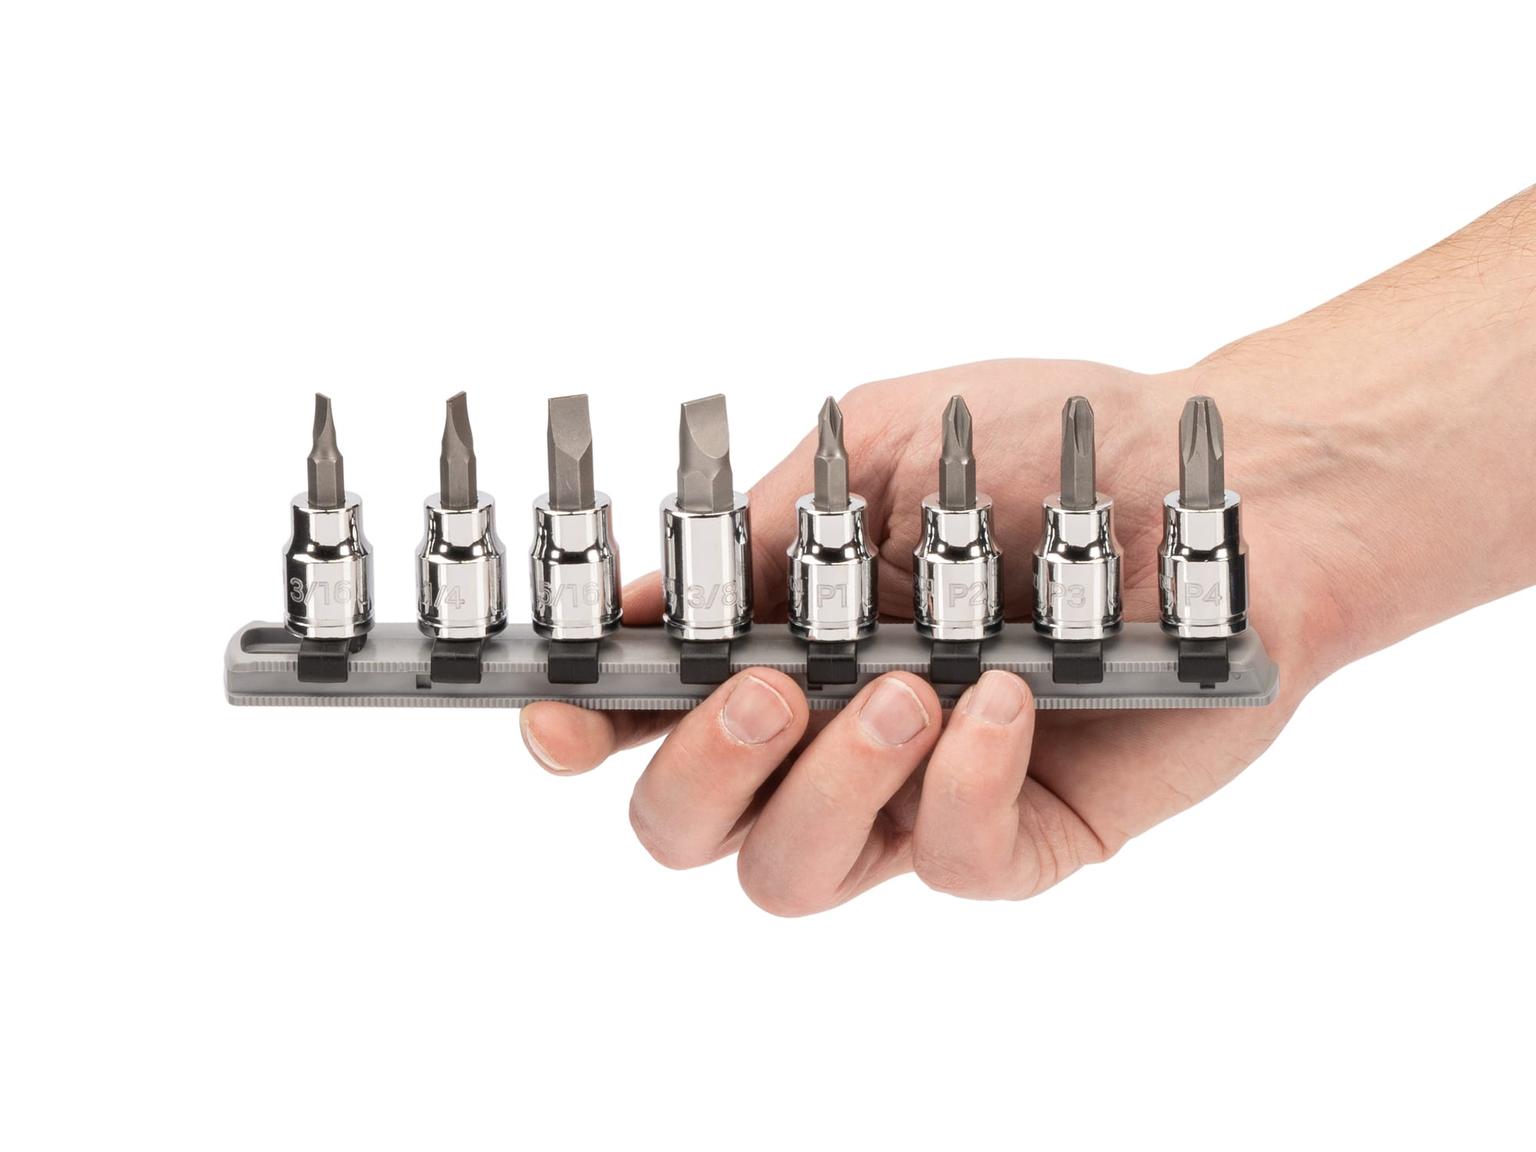 TEKTON SHB91109-T 3/8 Inch Drive Phillips/Slotted Bit Socket Set with Rail, 8-Piece (#1-#4, 3/16-3/8 in.)